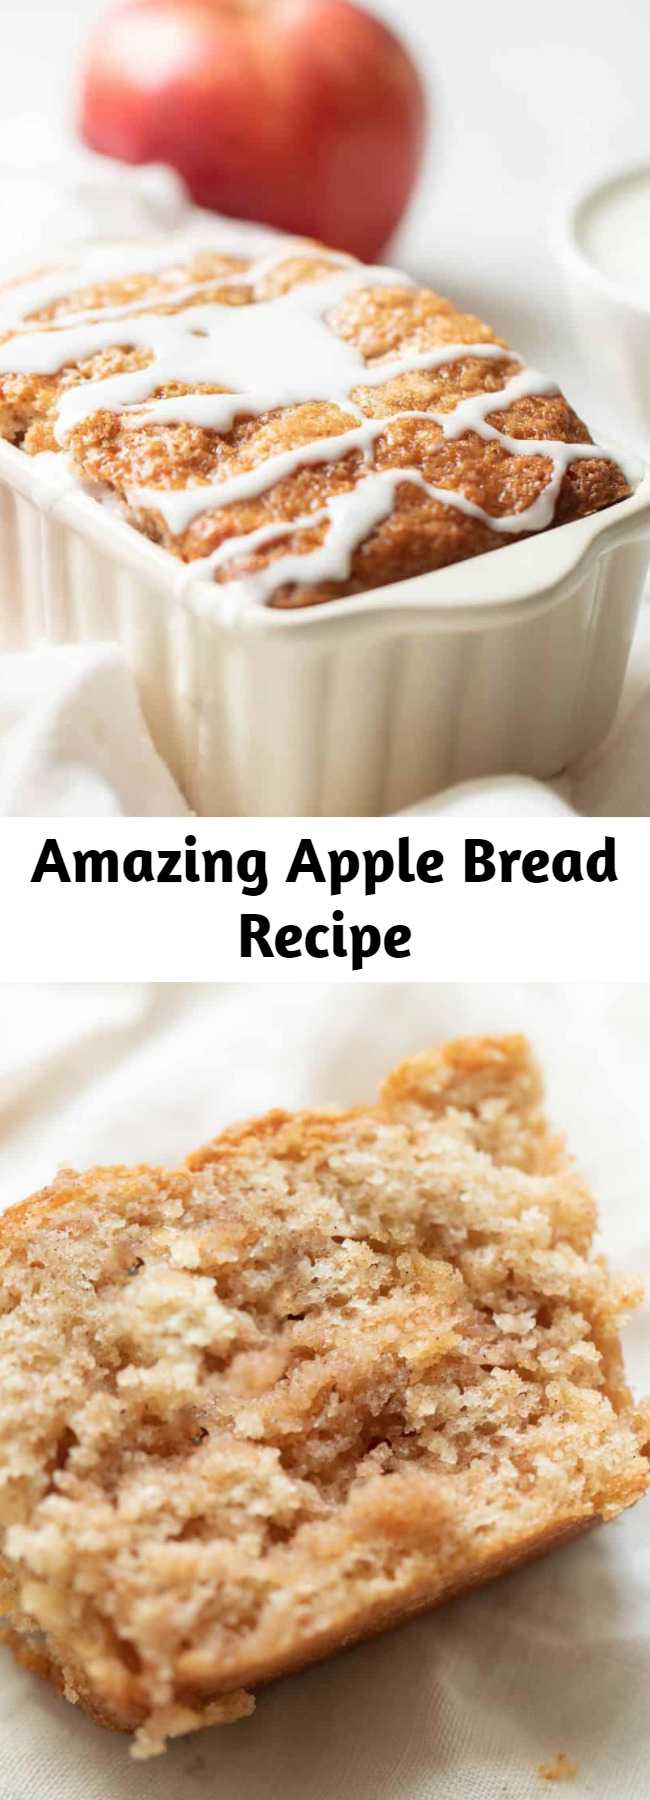 Amazing Apple Bread Recipe - This apple cinnamon bread recipe yields 6 mini loaves, making it great for both indulging and gifting! It’s a foolproof no yeast quickbread that takes just 10 minutes from mixer to oven requires only staple ingredients. How is that for easy fall flavor? #applebread #sweetbread #apple #bread #applecinnamonbread #cinnamon #fall #fallrecipe